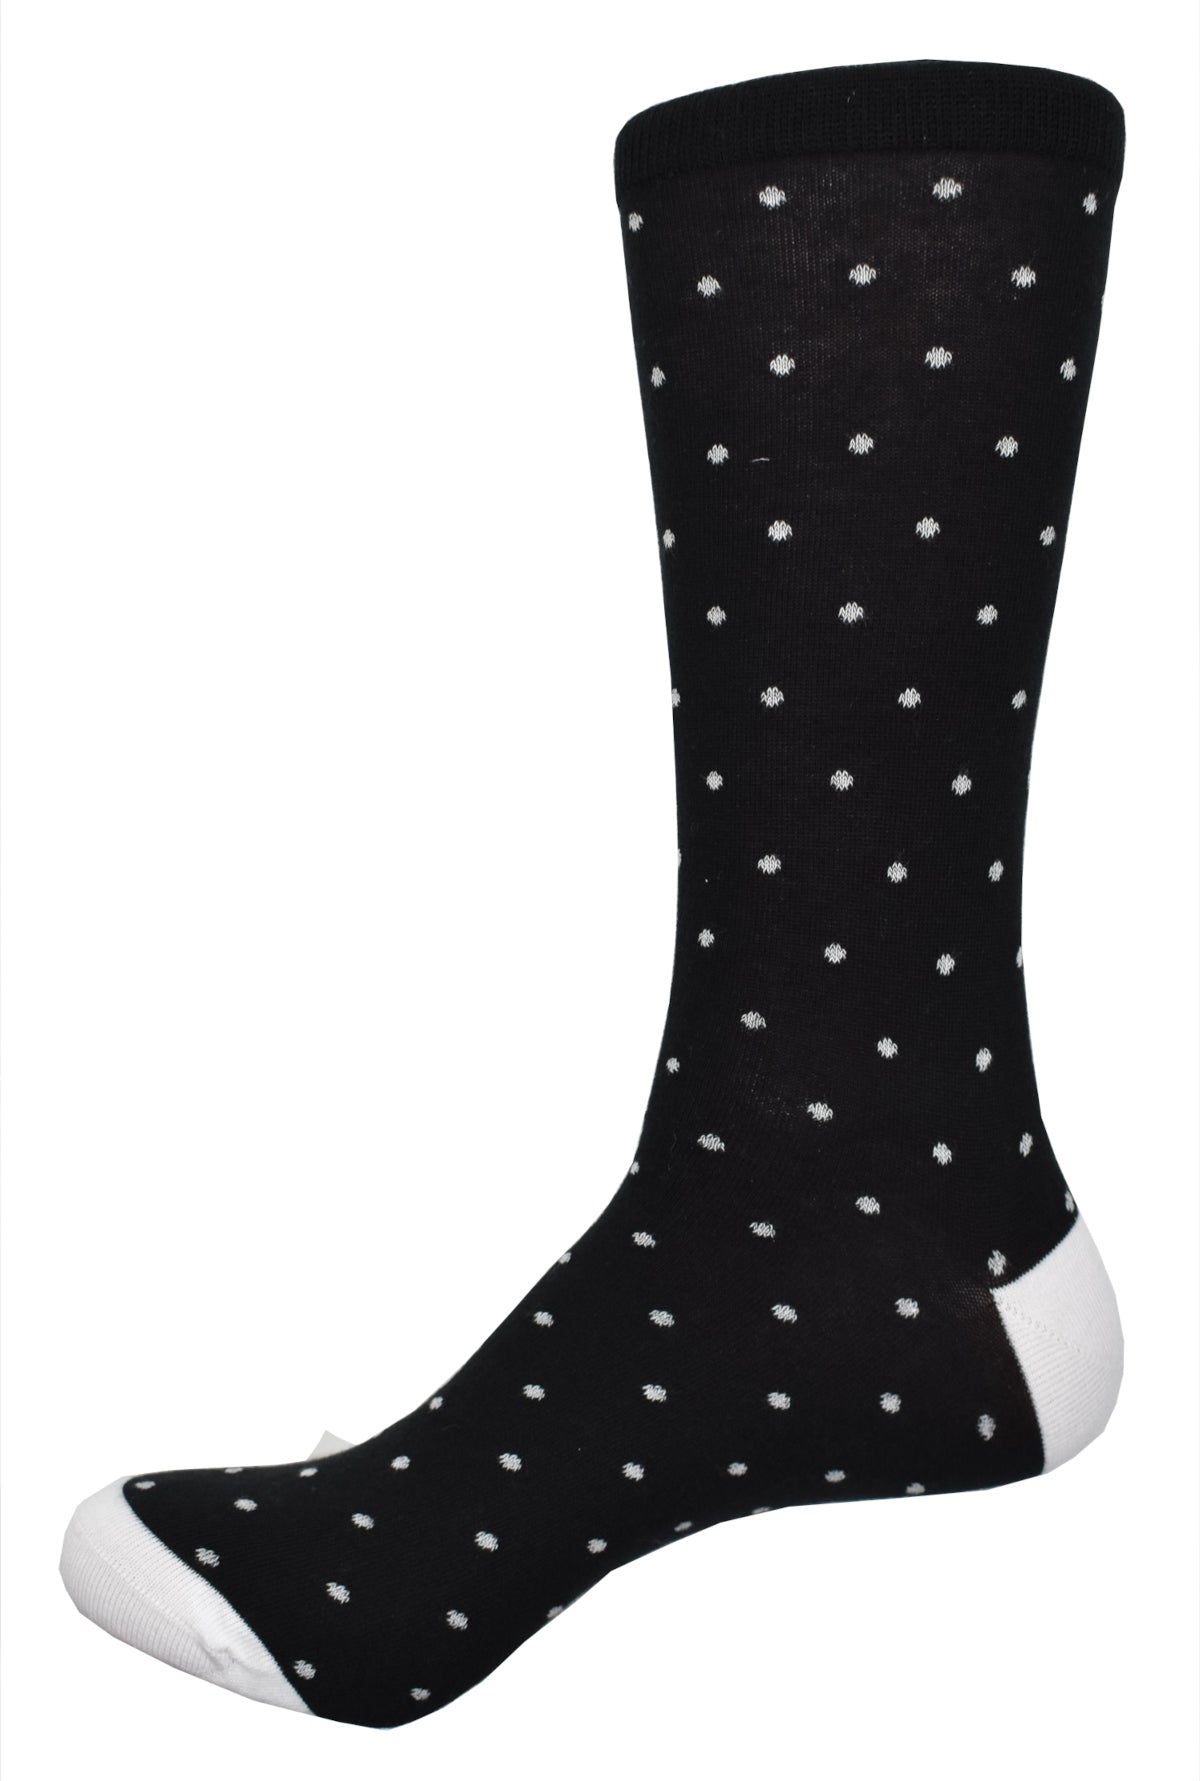 Look no further than the ZV1555 Black with White Dots for the perfect blend of style and comfort. Sophisticated and timeless, this rich mercerized cotton blend features subtle white dots for an understatedly classy look. With added lycra for a soft, flexible feel, this elegant staple will guarantee you look sharp in any occasion.  Fits size 9-11.